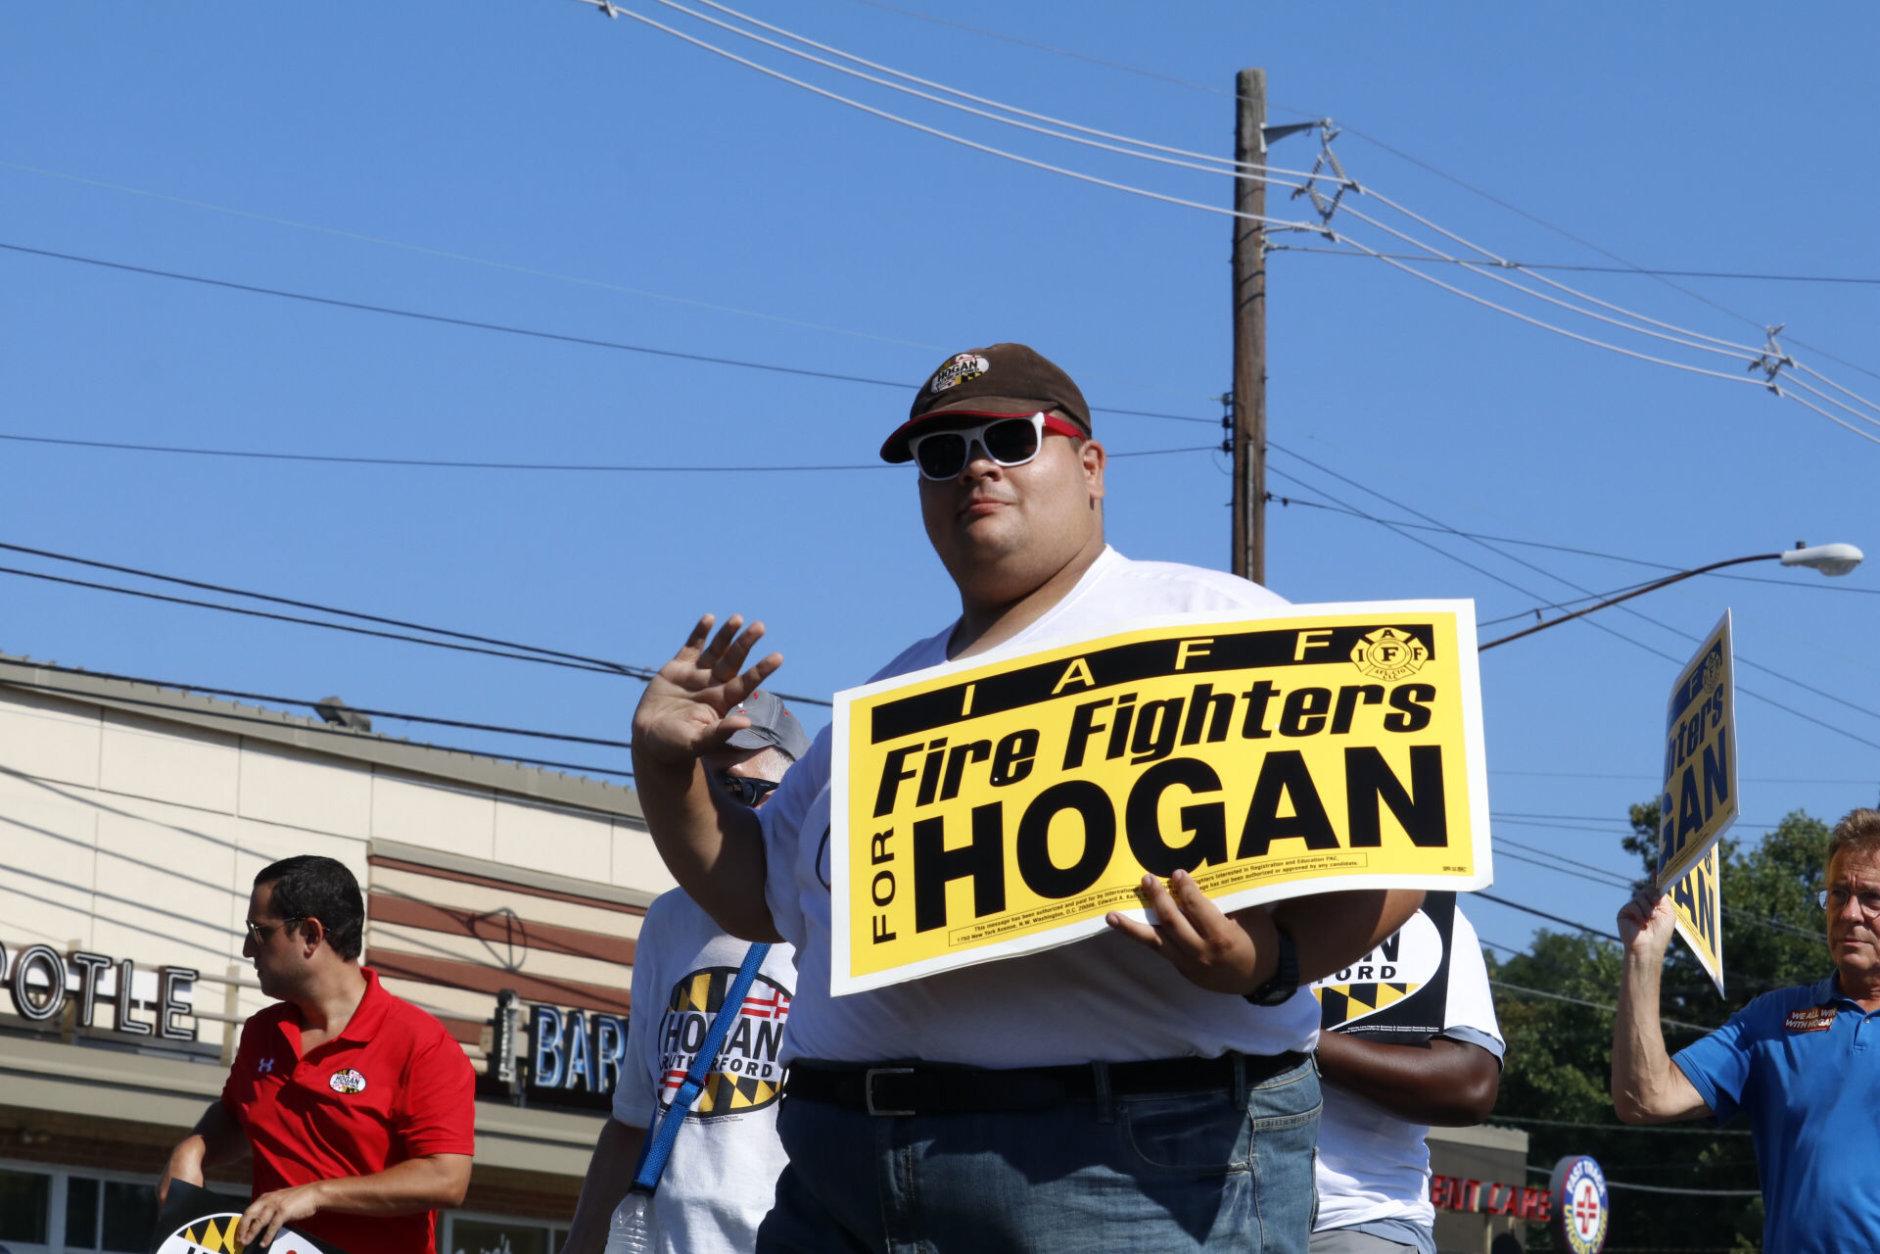 Hogan supporters showed up to support their candidate in the Kensington Labor Day parade. Hogan won the support of the IAFF : the Labor Union that represents firefighters. (WTOP/Kate Ryan)